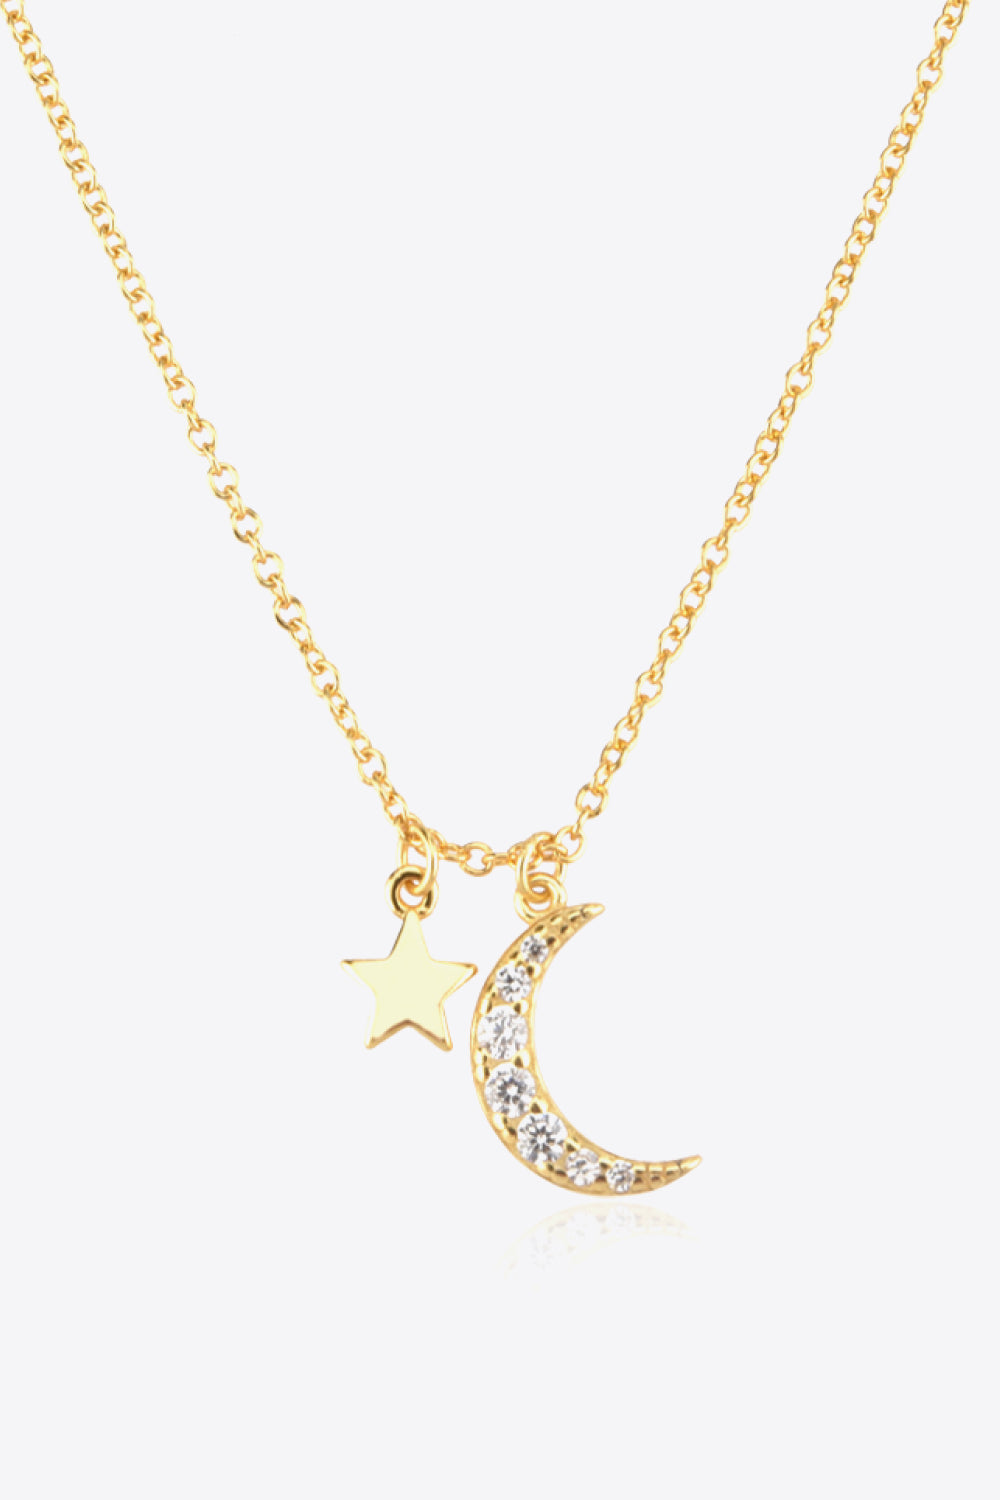 Zircon pendant necklace, star and moon design, celestial jewelry, fashion accessory, statement piece, elegant necklace, glamorous accessory, celestial theme, dainty details, versatile necklace